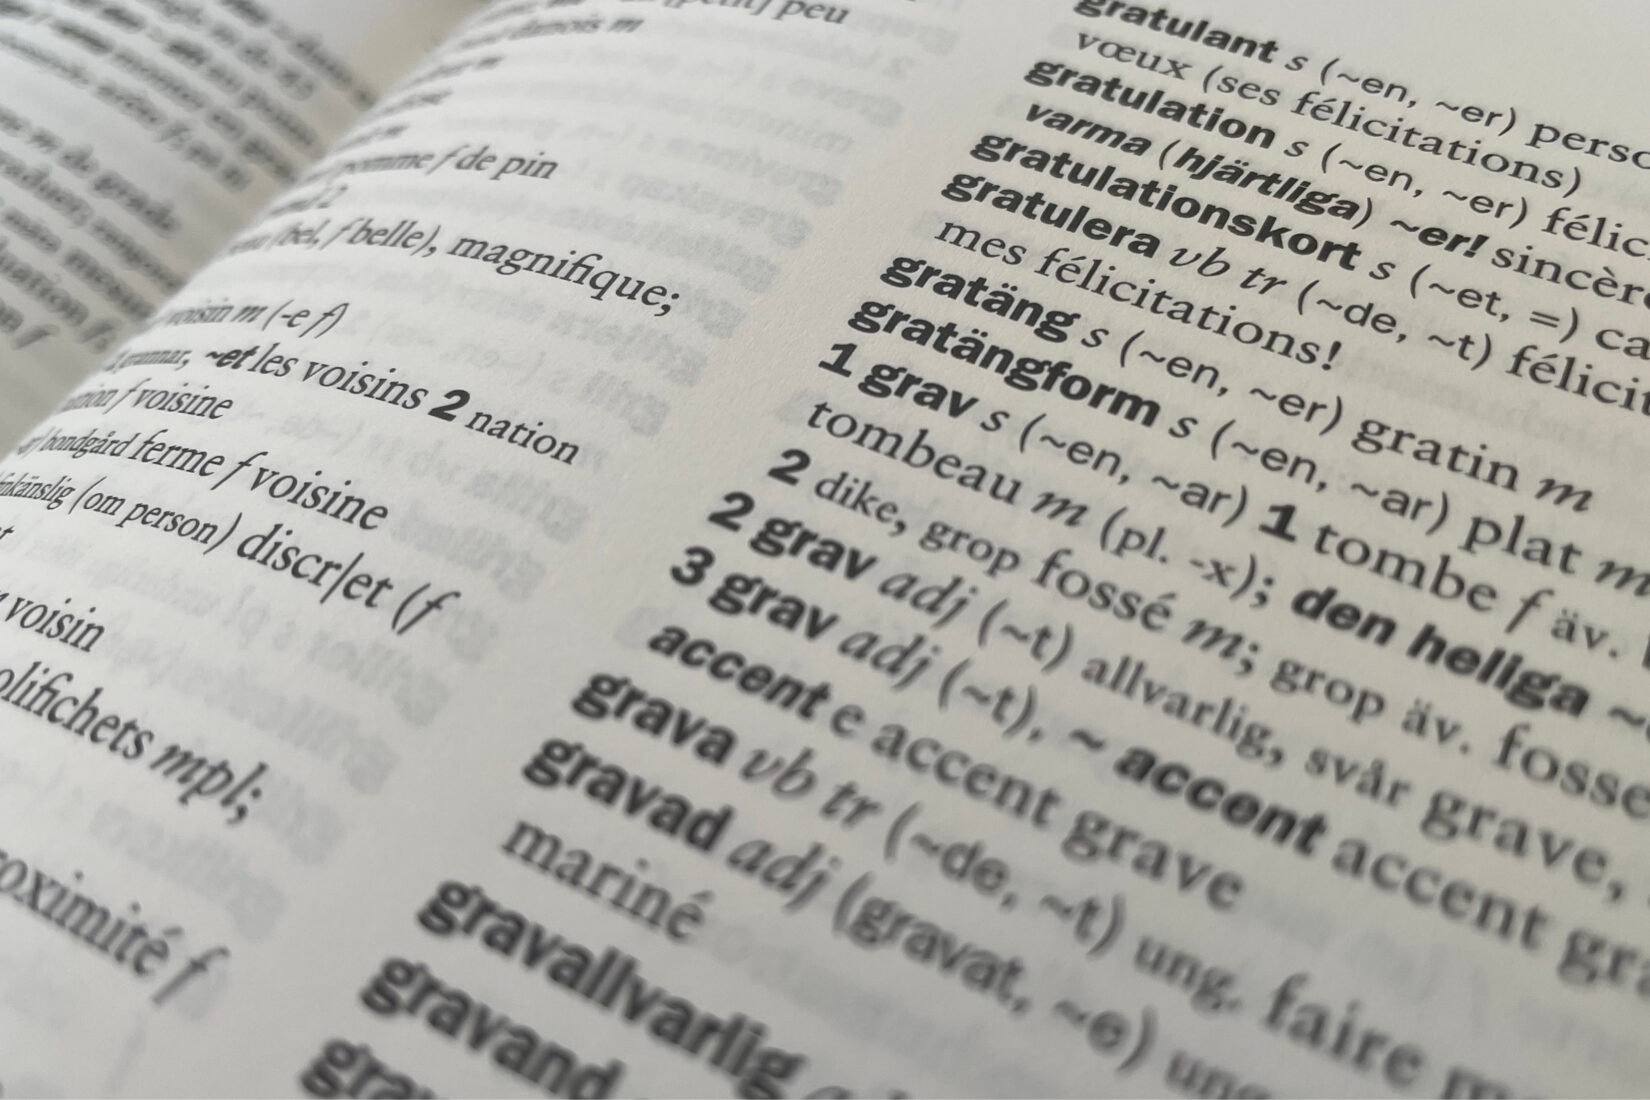 Photo of a page in the French-Swedish dictionary including the word "gratäng".